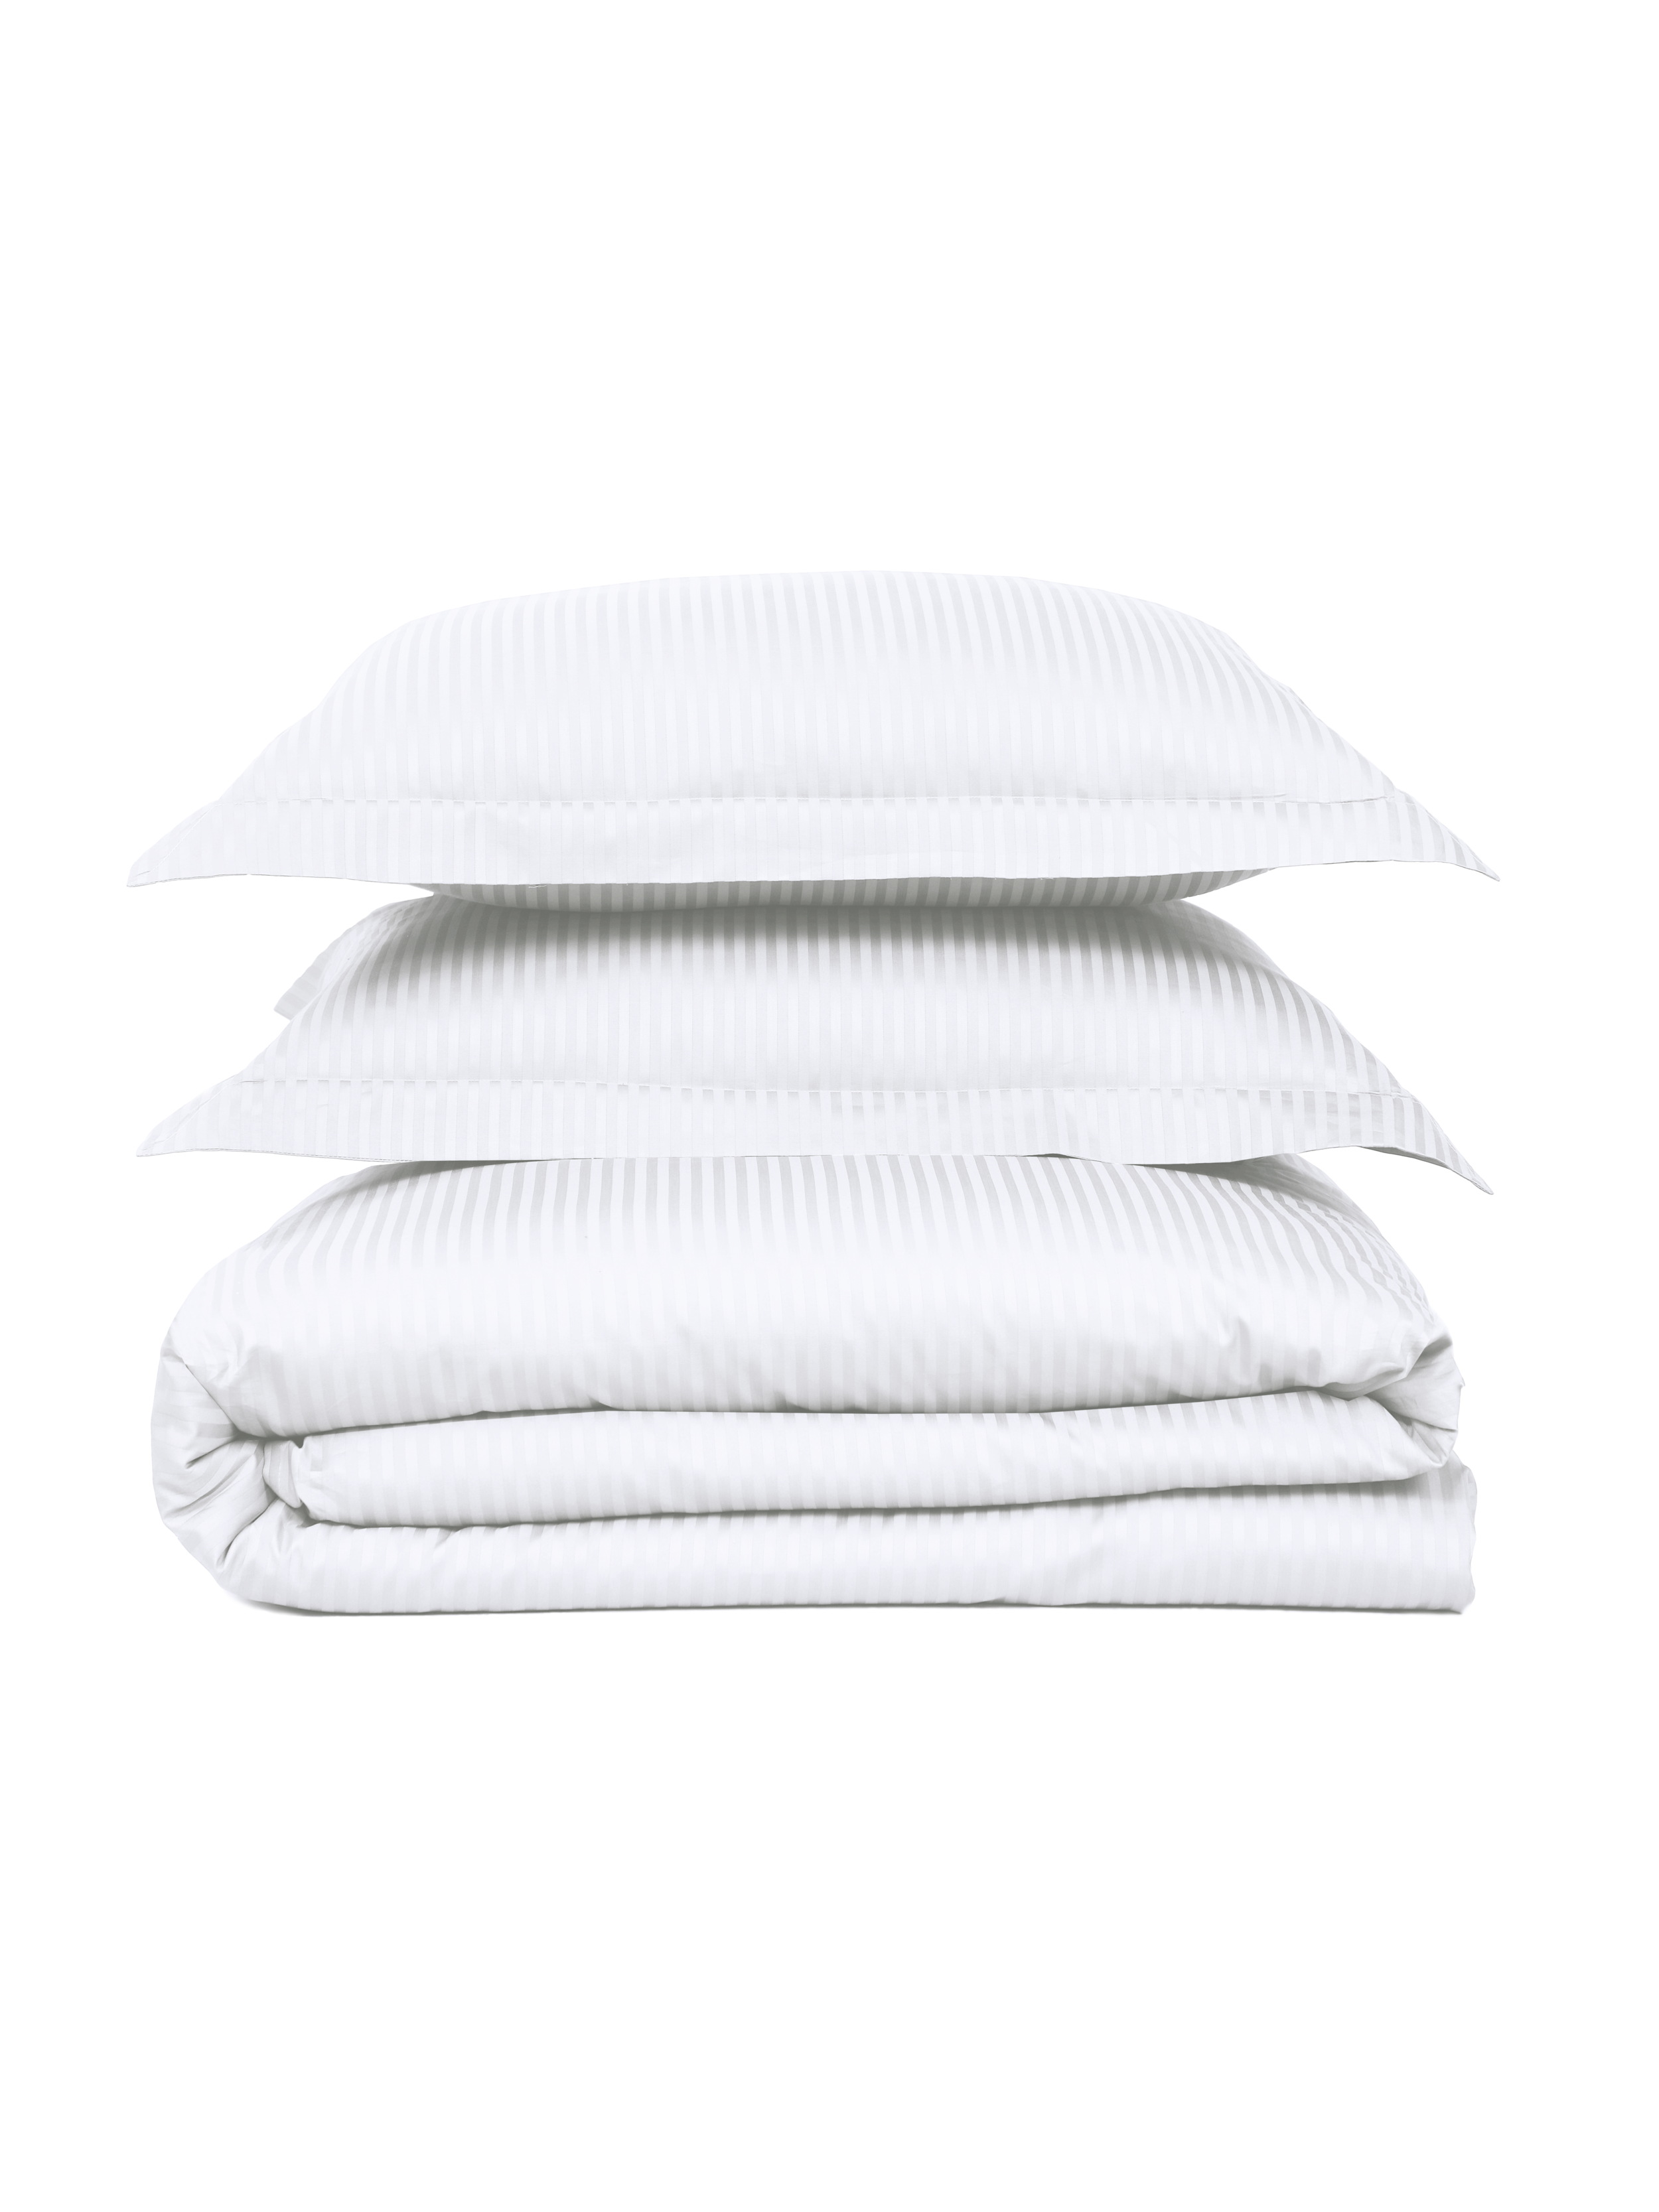 Feather &amp; Stitch New York Duvet Covers